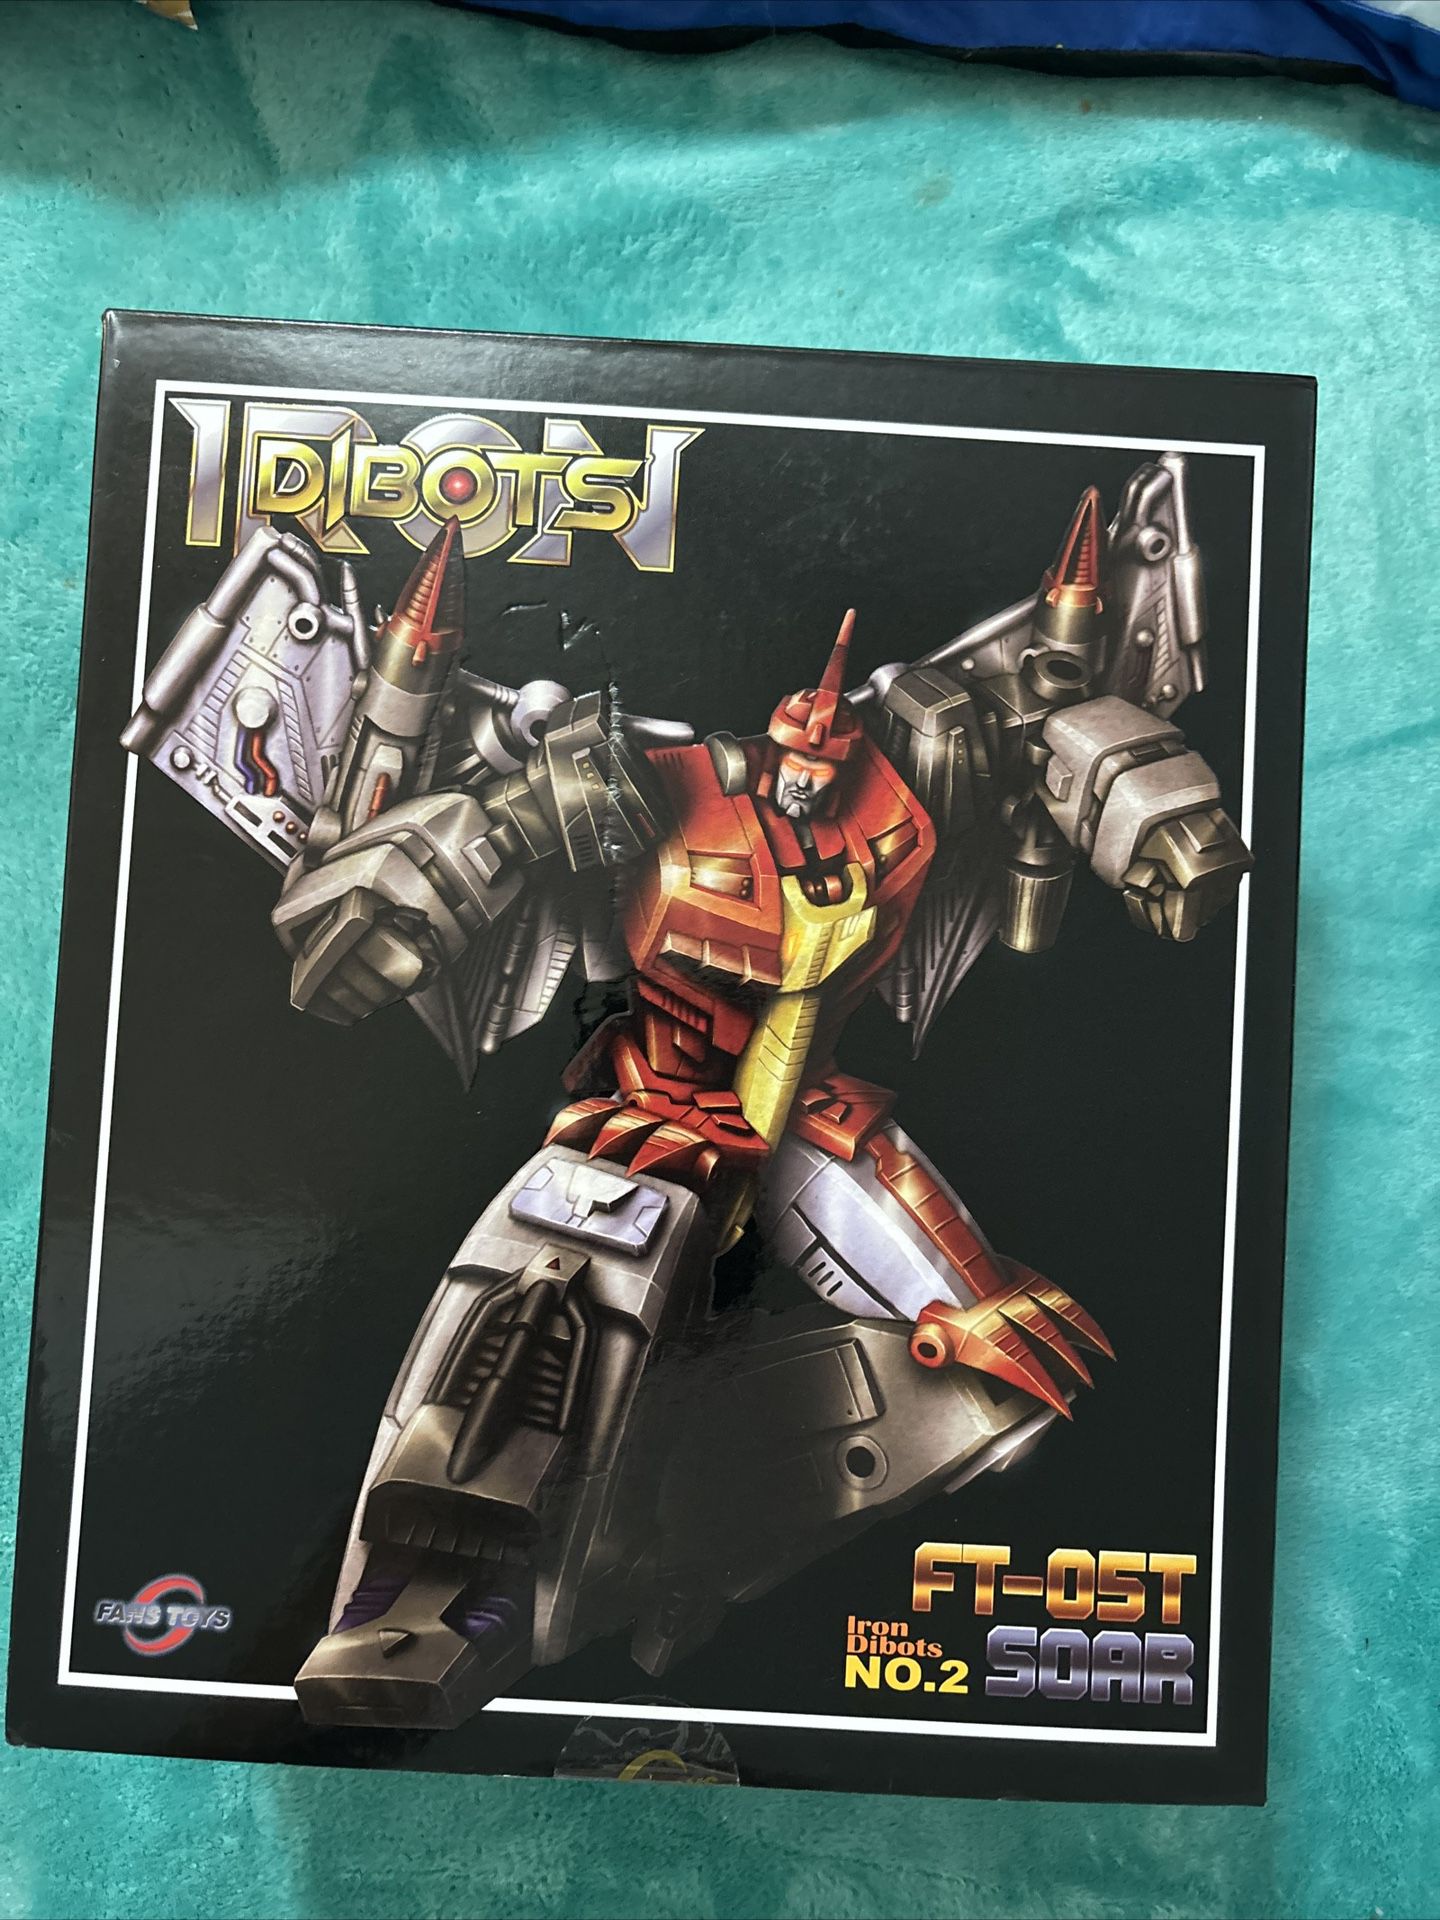 FT-05T Soar Iron Dibots Number 2 Transformers Transforming Toys